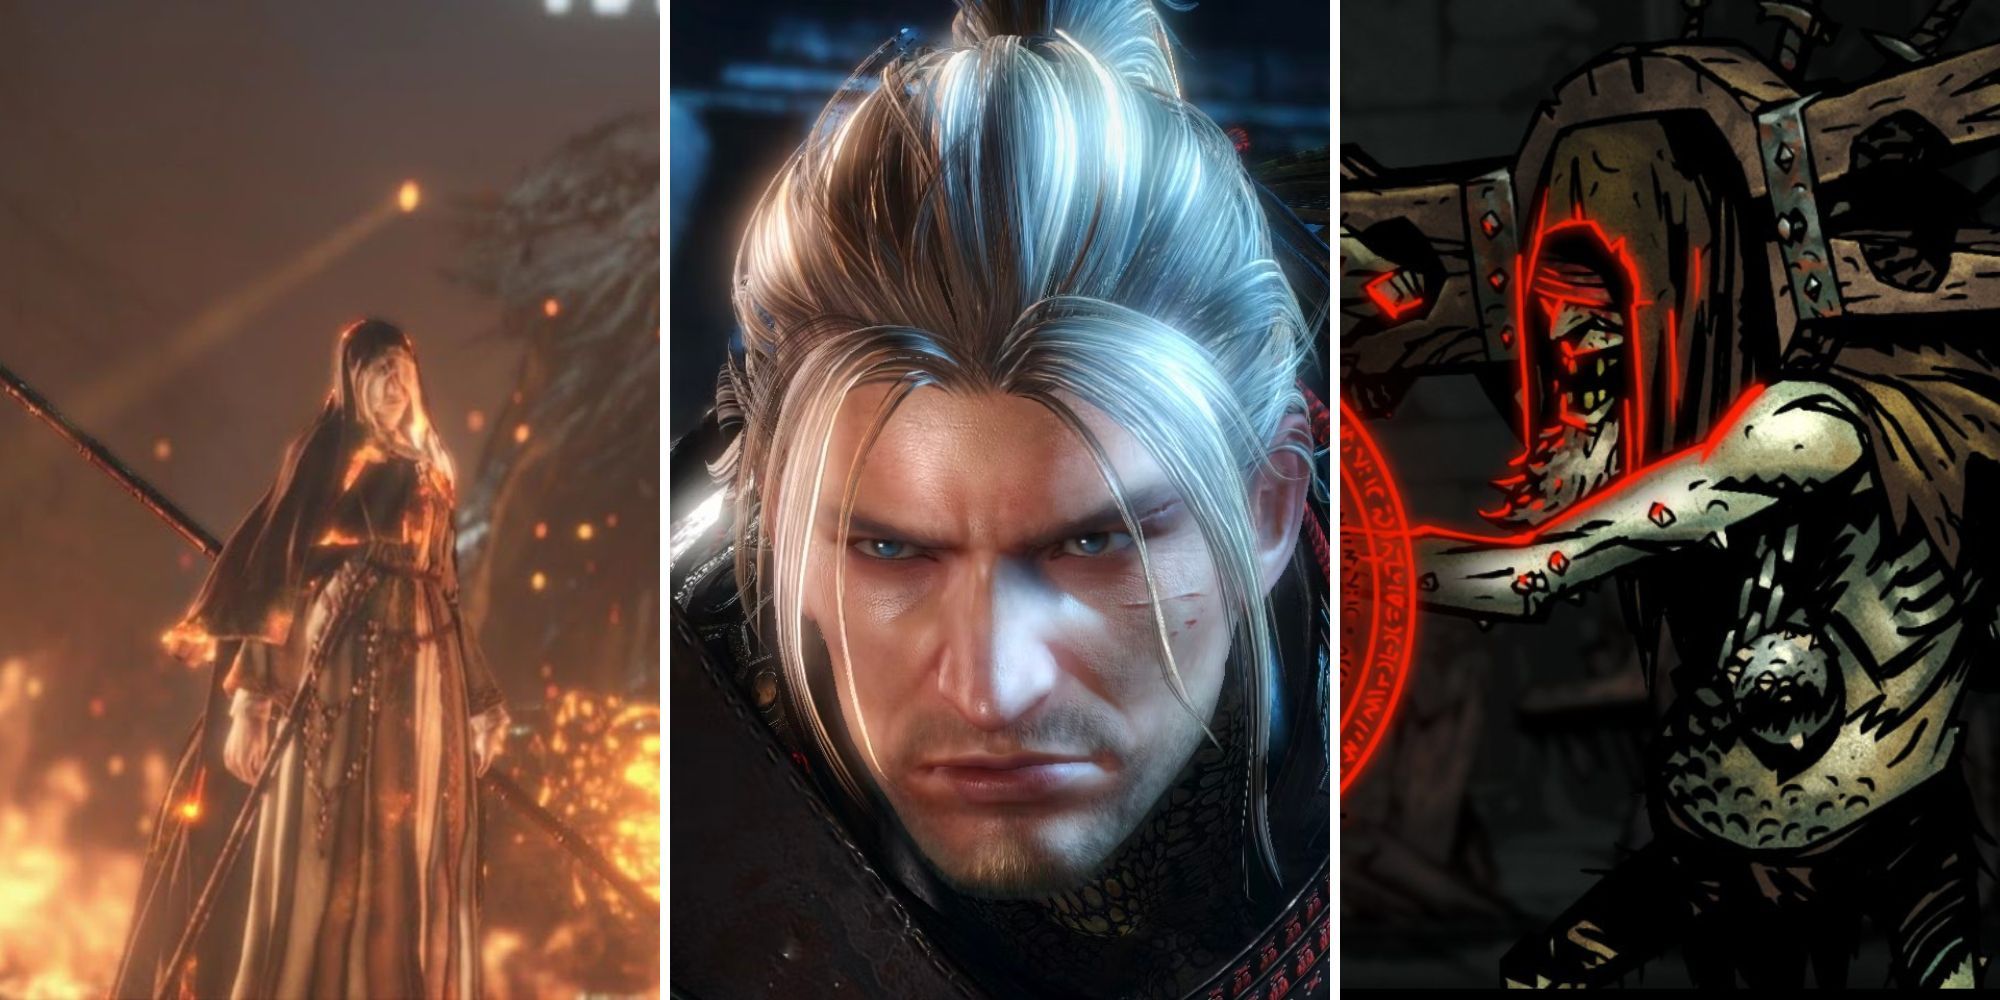 A grid showing the three PS4 RPGS Dark Souls 3, Nioh, and Darkest Dungeon